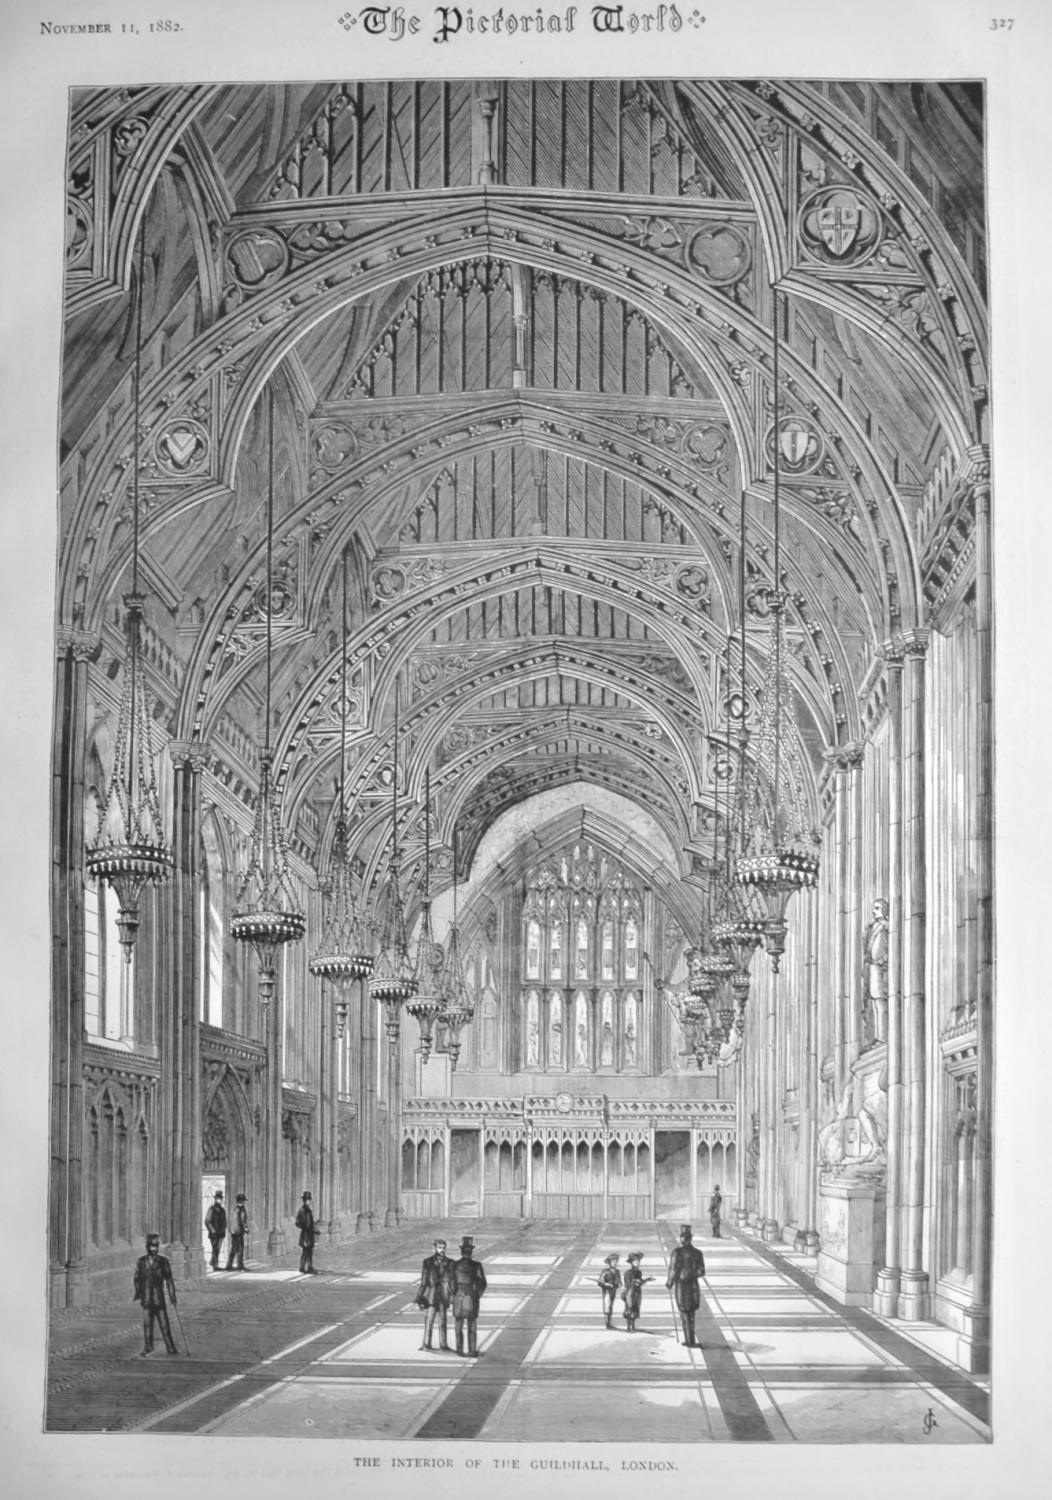 The Interior of the Guildhall, London.  1882.